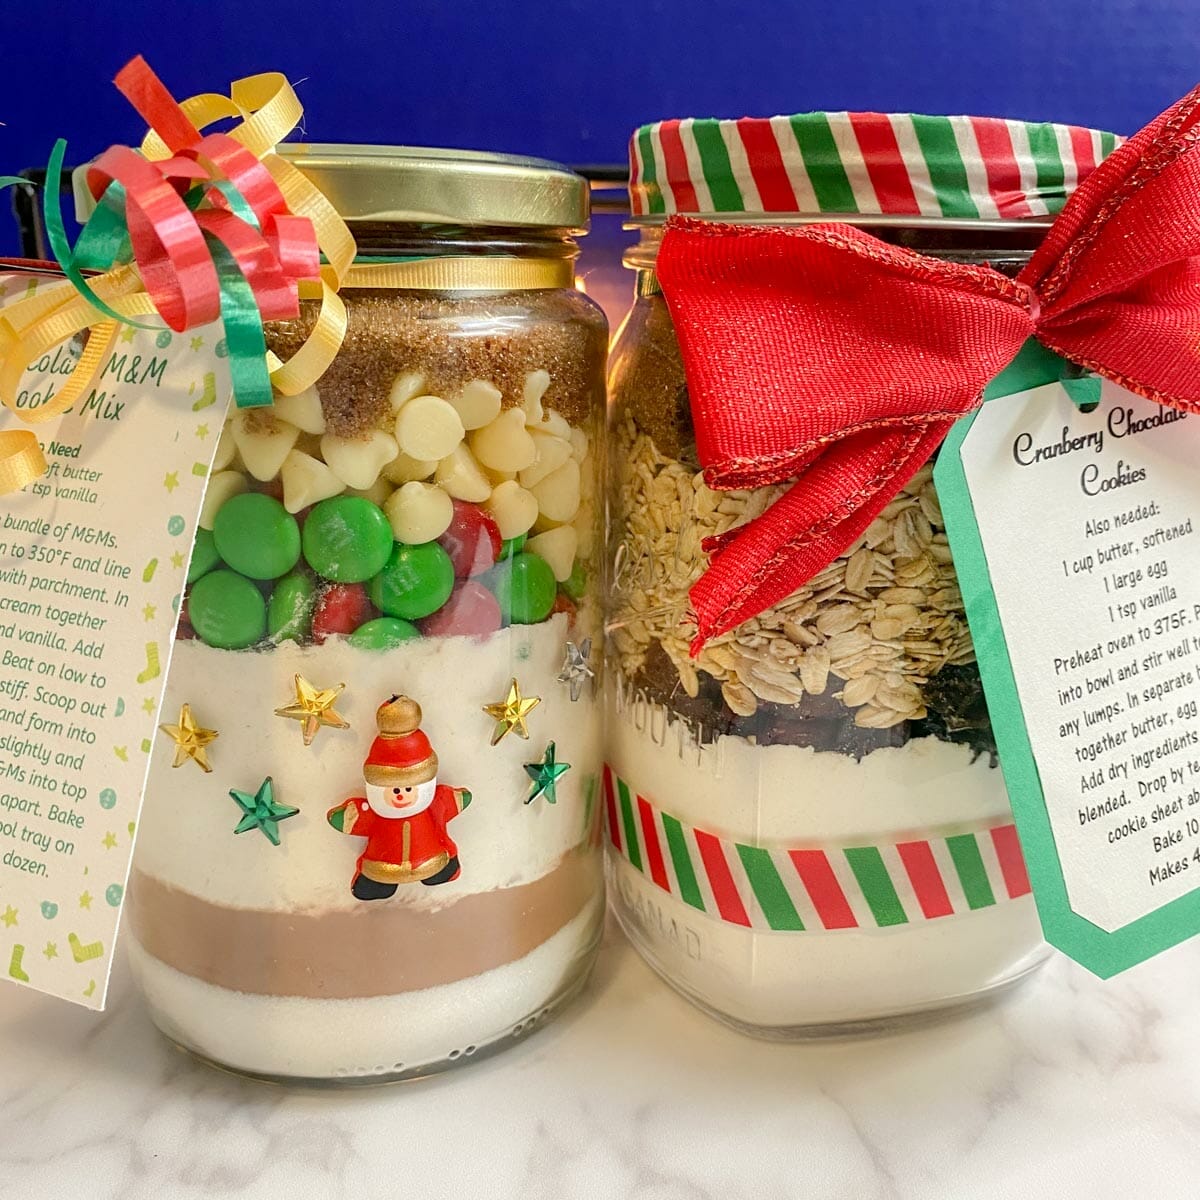 2 jars of cookie mixes with instruction/gift tags and decorative ribbon/bows.